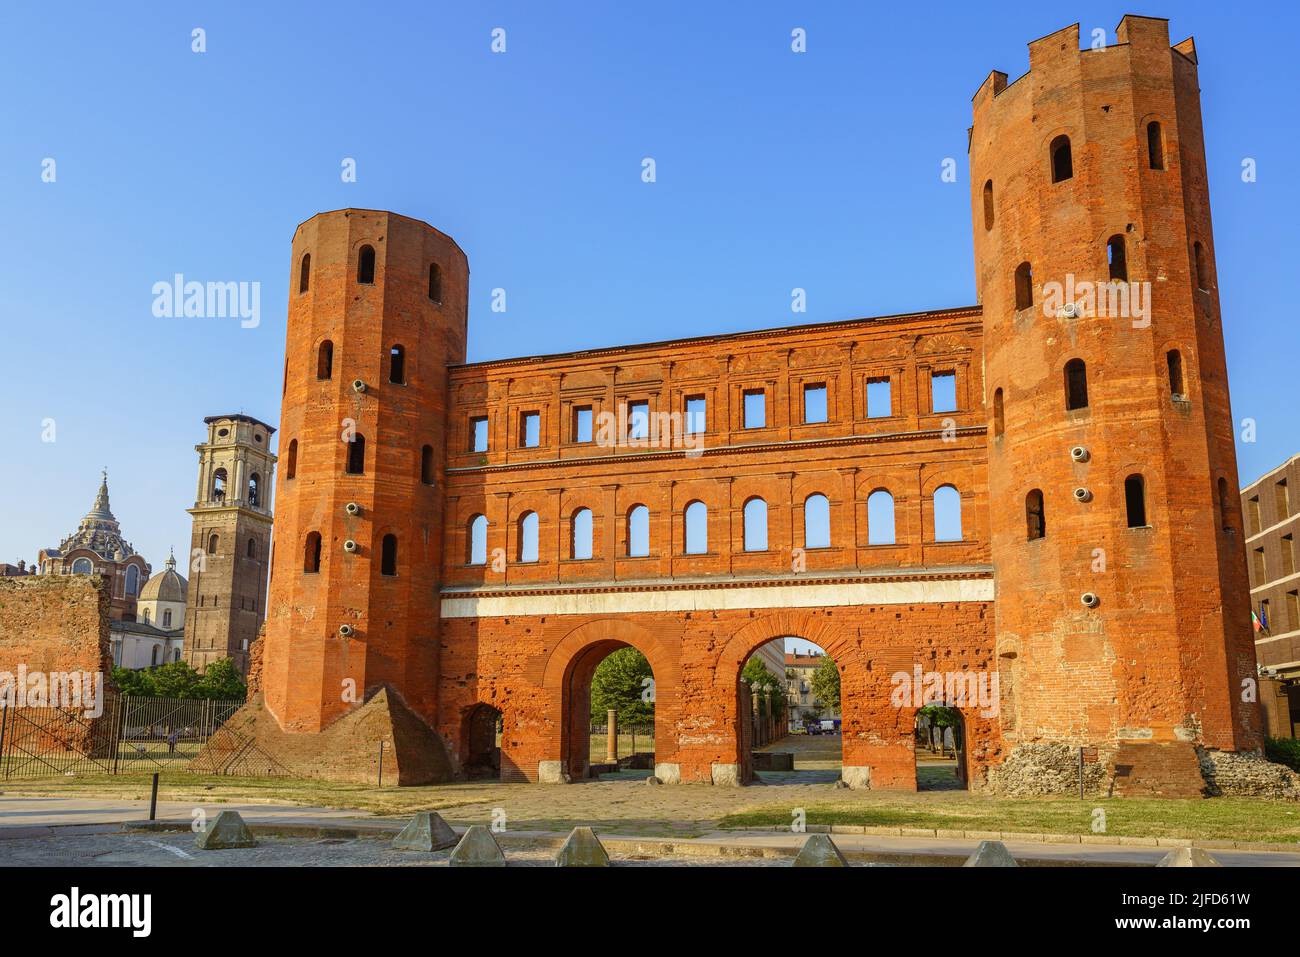 The Palatine Gate is a Roman Age landmark located in Turin, Italy Stock Photo